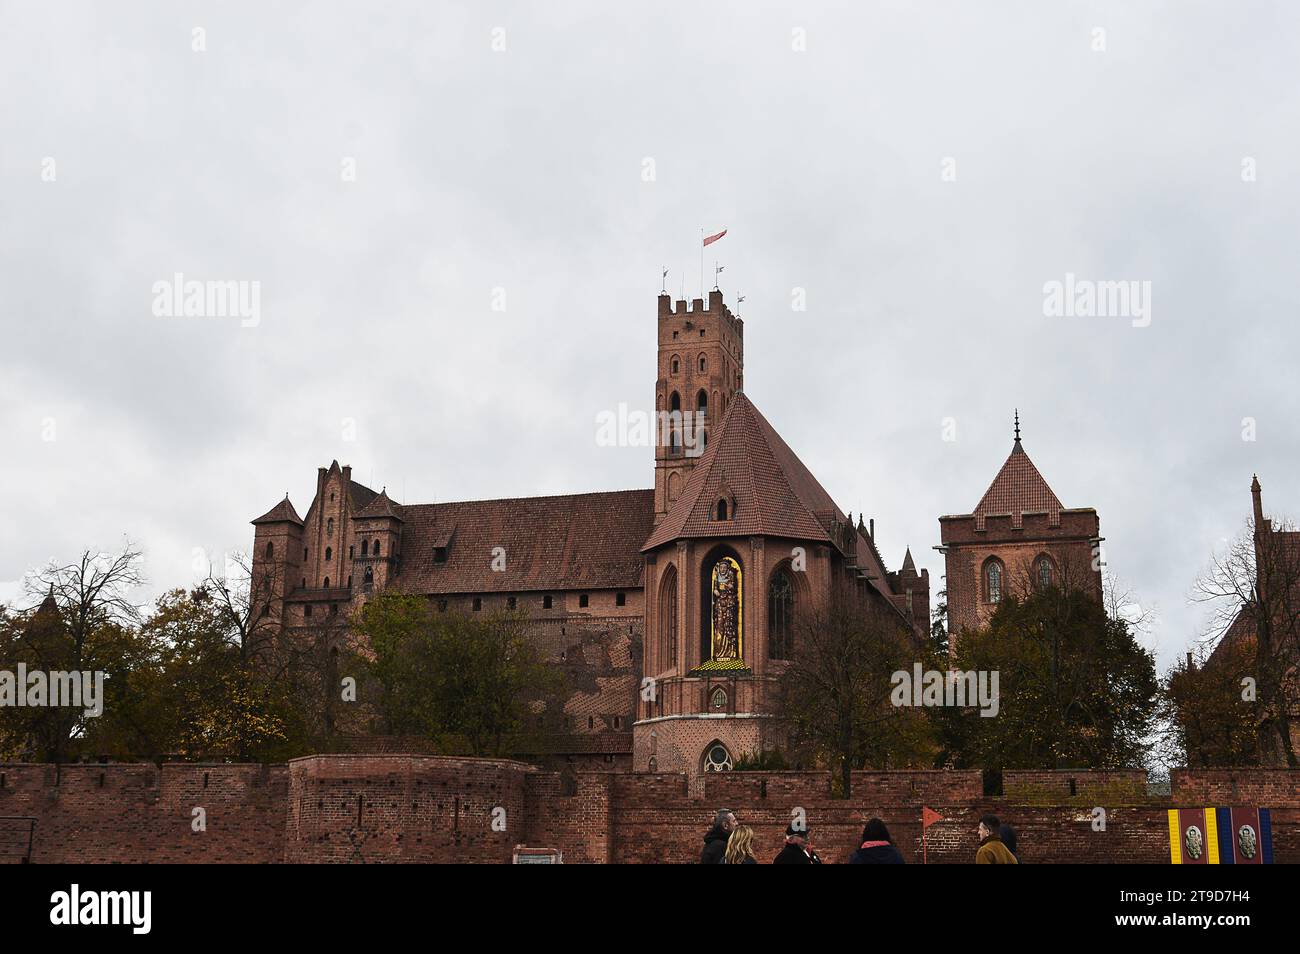 MALBORK, POLAND - 6 NOVEMBER 2023: The world's largest castle, the castle of the Teutonic Order originally built in the 13th century. Stock Photo